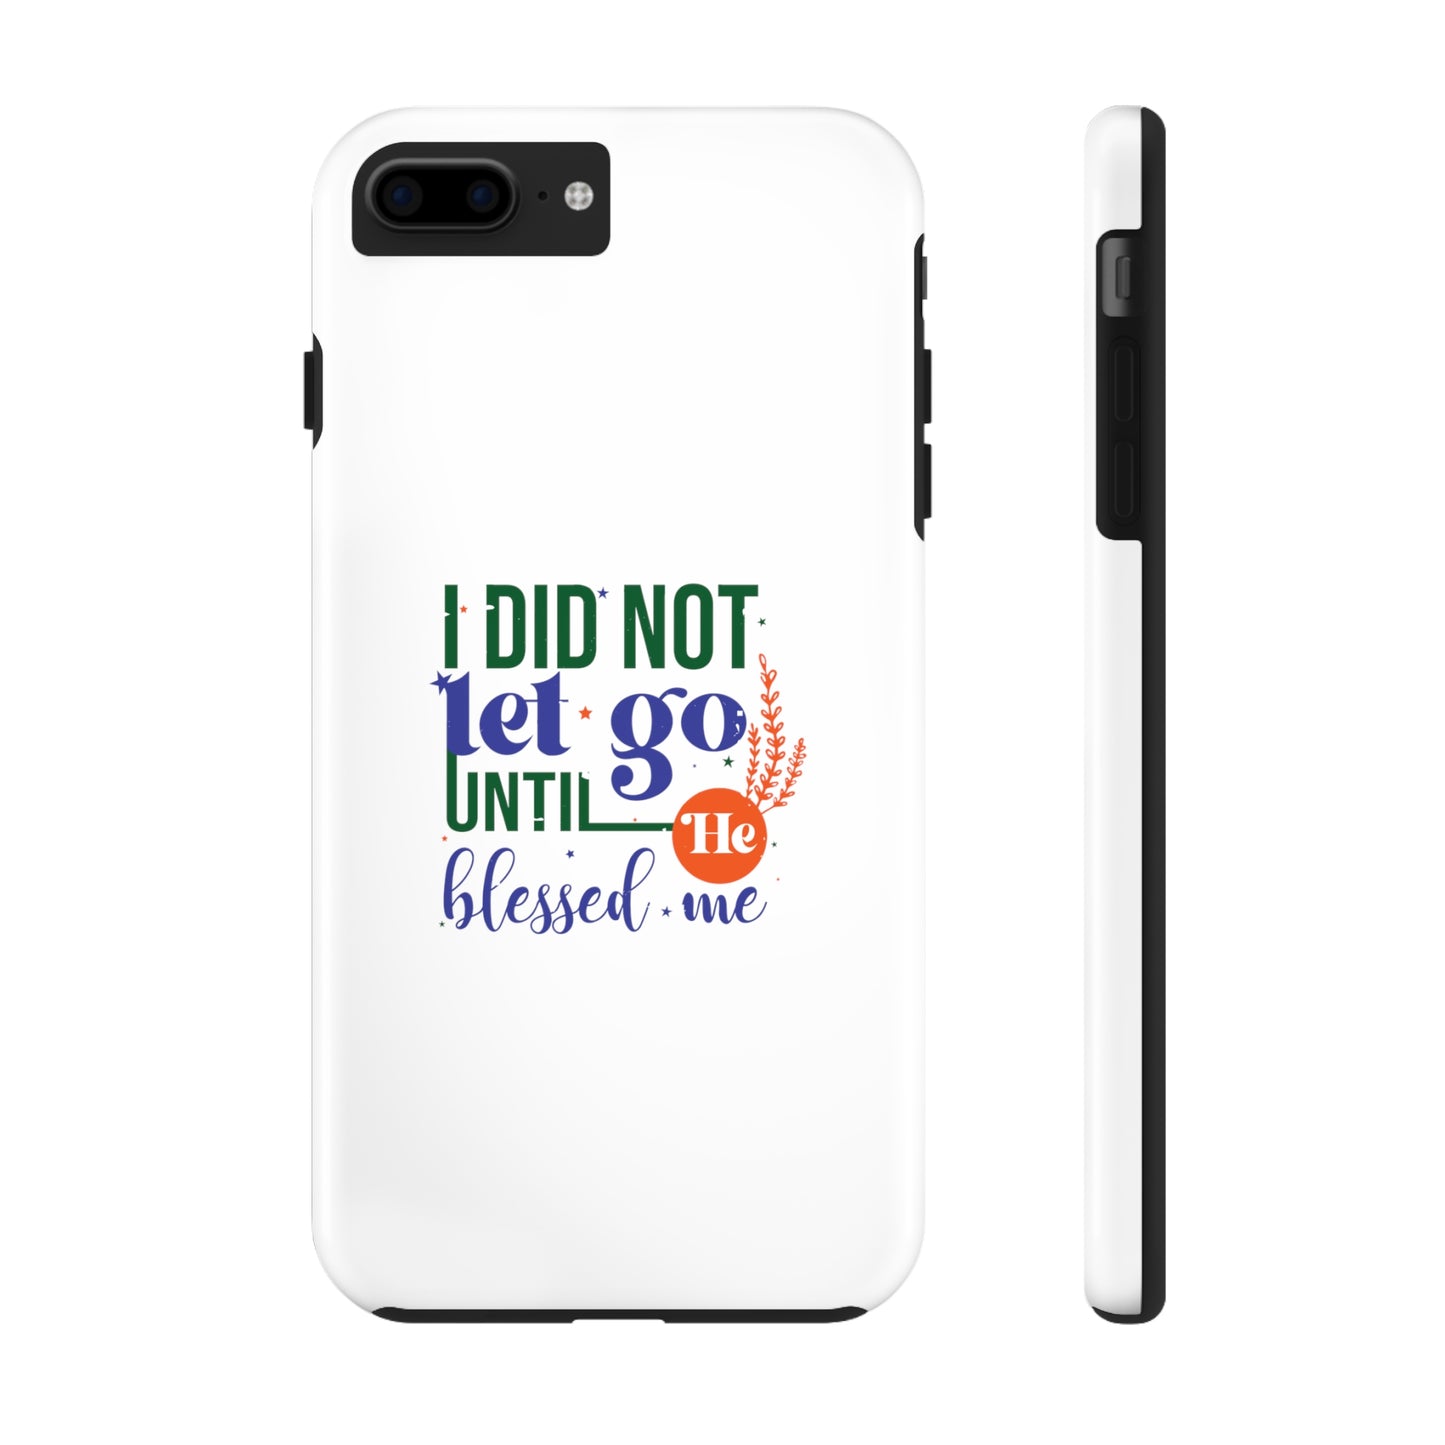 I Did Not Let Go Until He Blessed Me Tough Phone Cases, Case-Mate